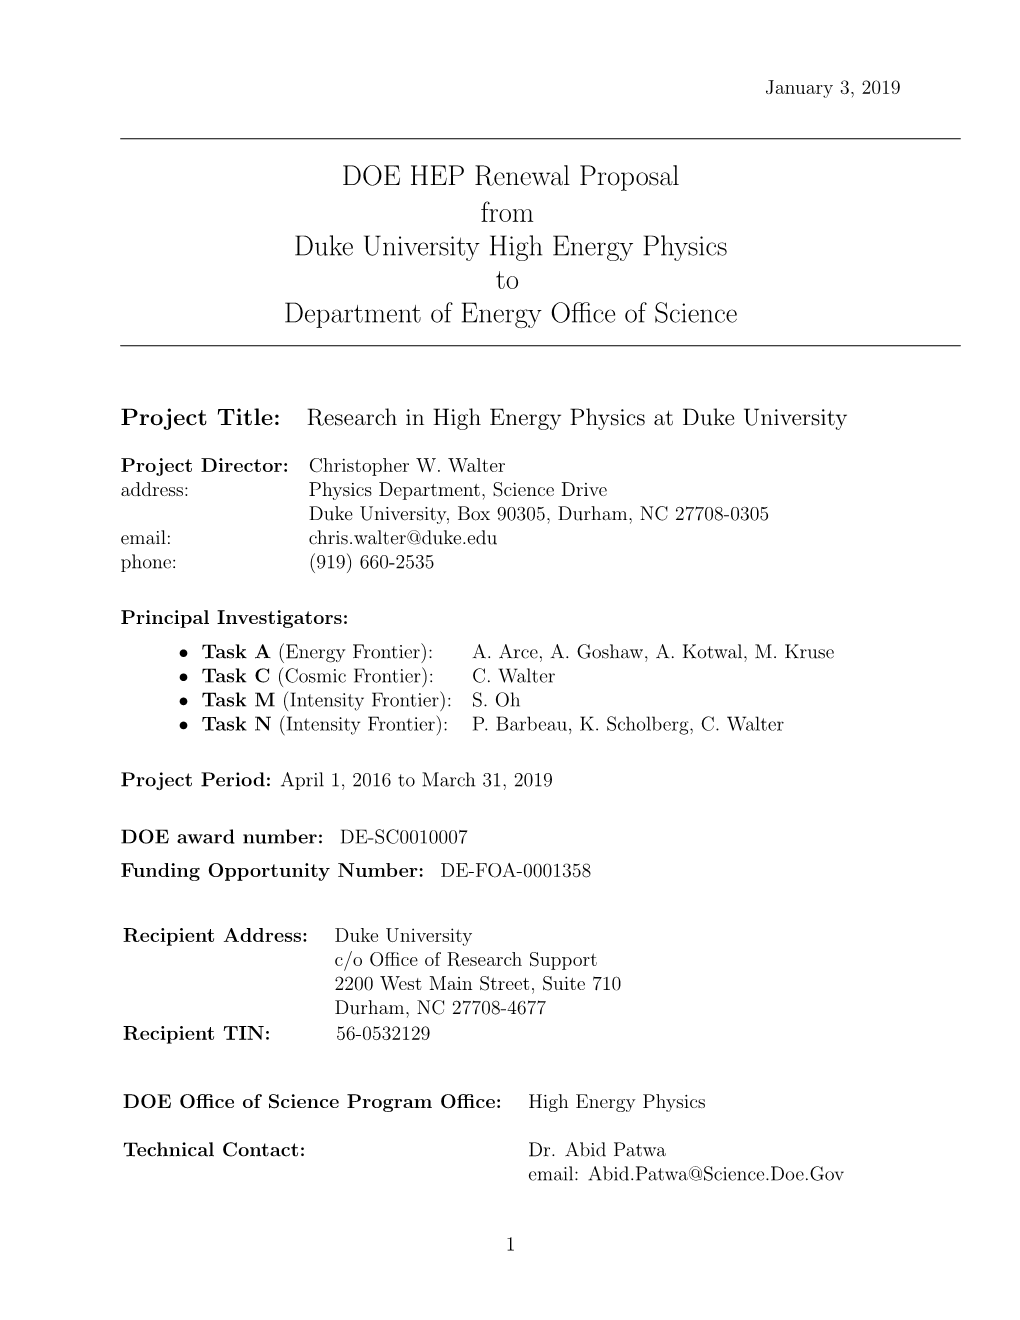 DOE HEP Renewal Proposal from Duke University High Energy Physics to Department of Energy Oﬃce of Science